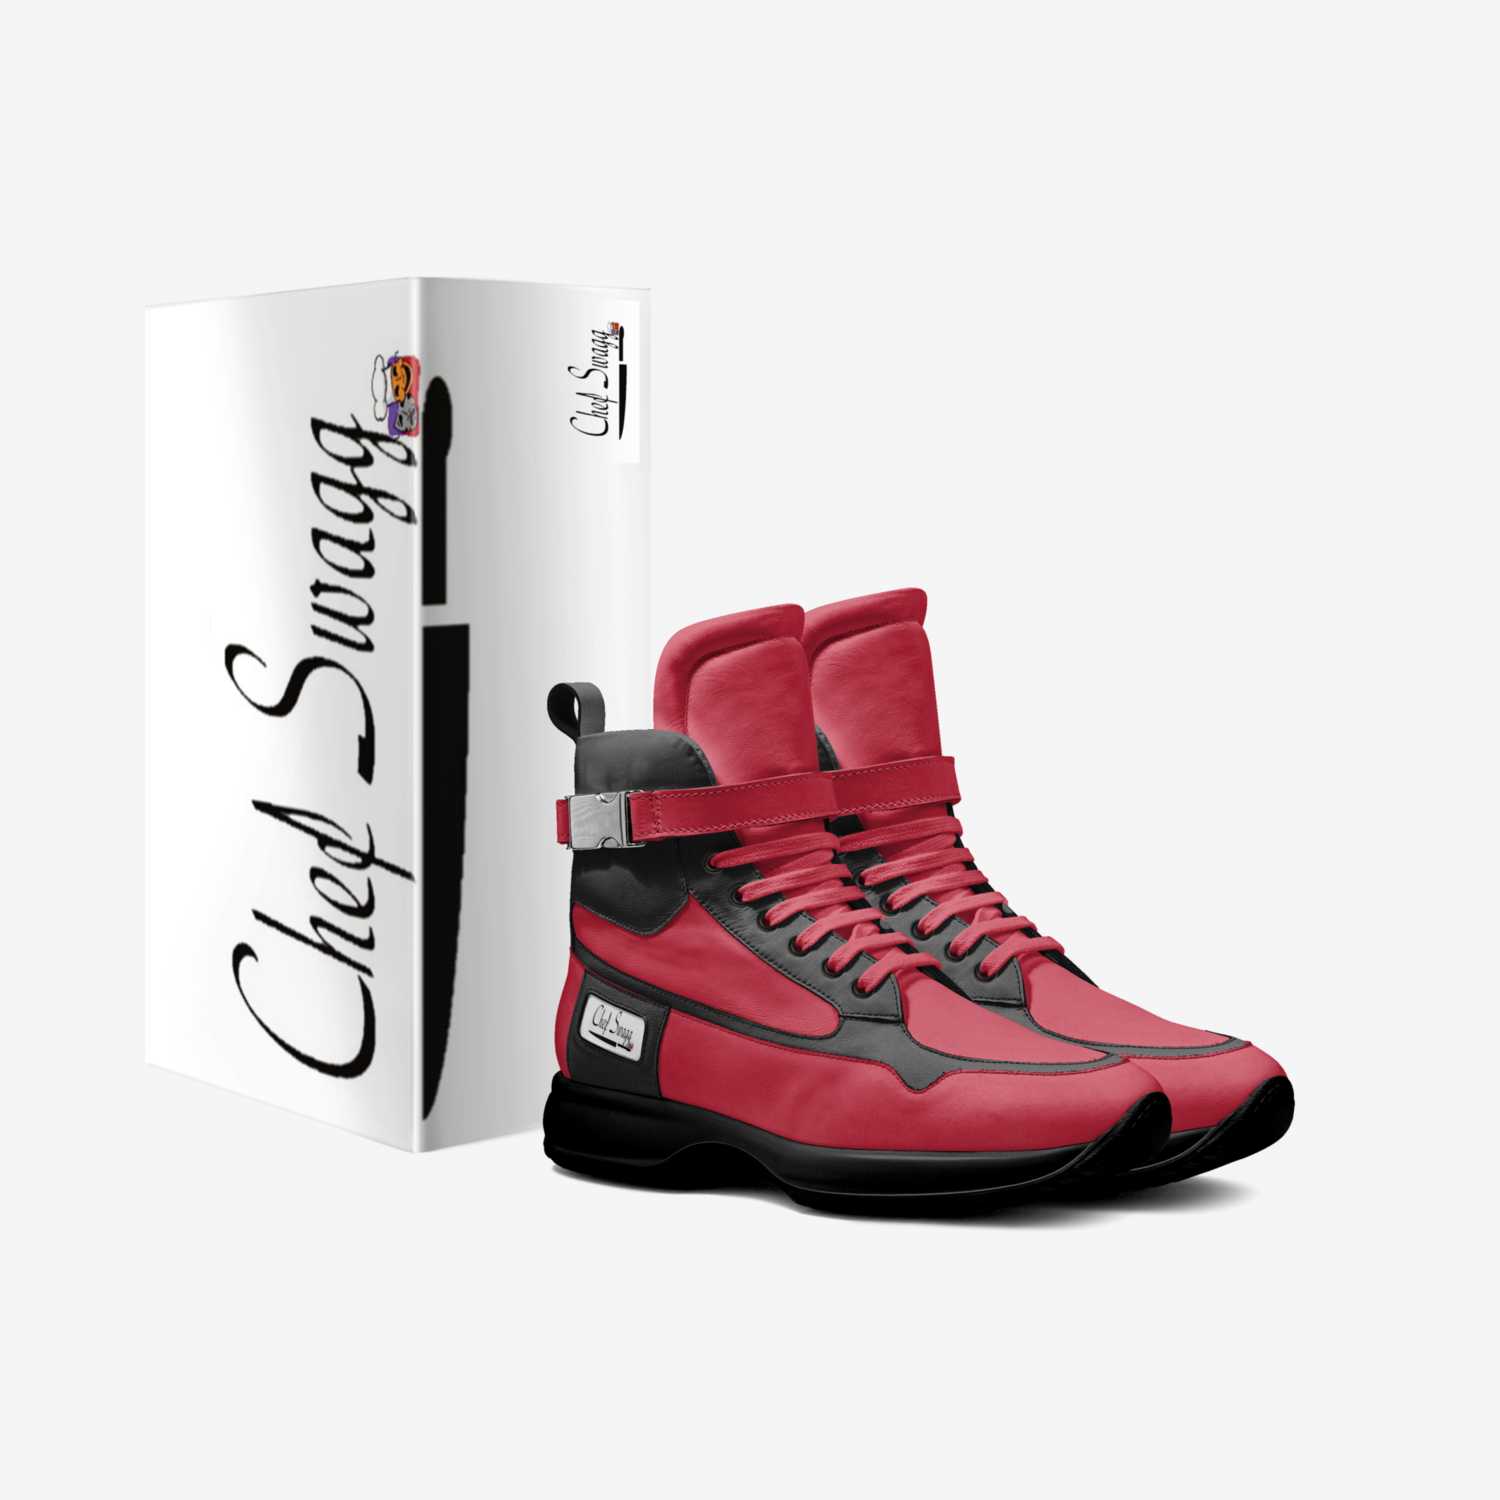 Chef Swagg custom made in Italy shoes by Kris Dixon | Box view